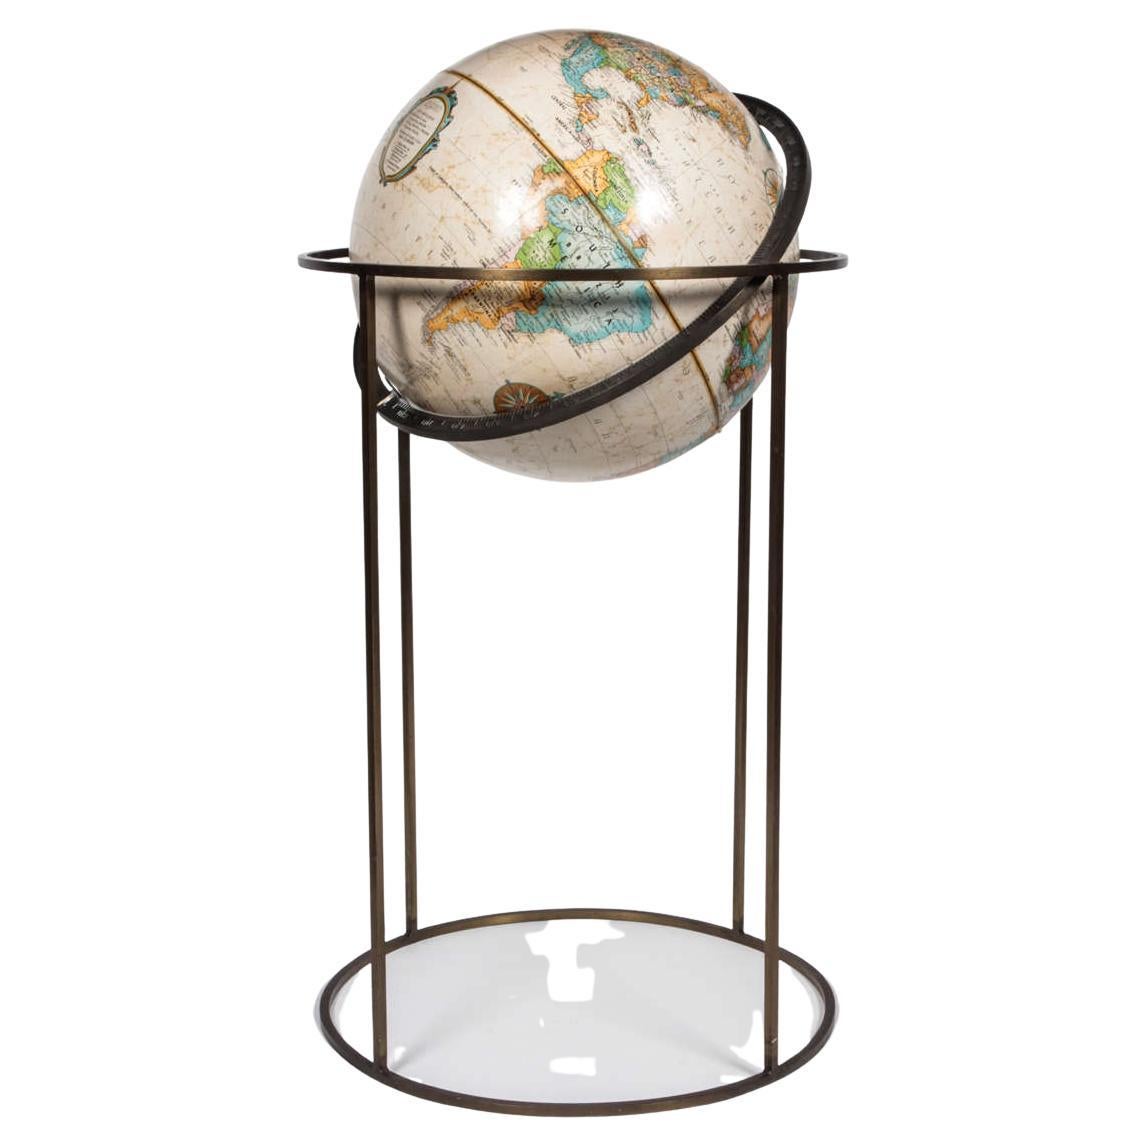 World globe by Replogle in the style of Paul McCobb, USA, circa 1970. Signed.

Beige globe supported by swivel stand in antiqued brass. Featuring square tube design made popular by McCobb.